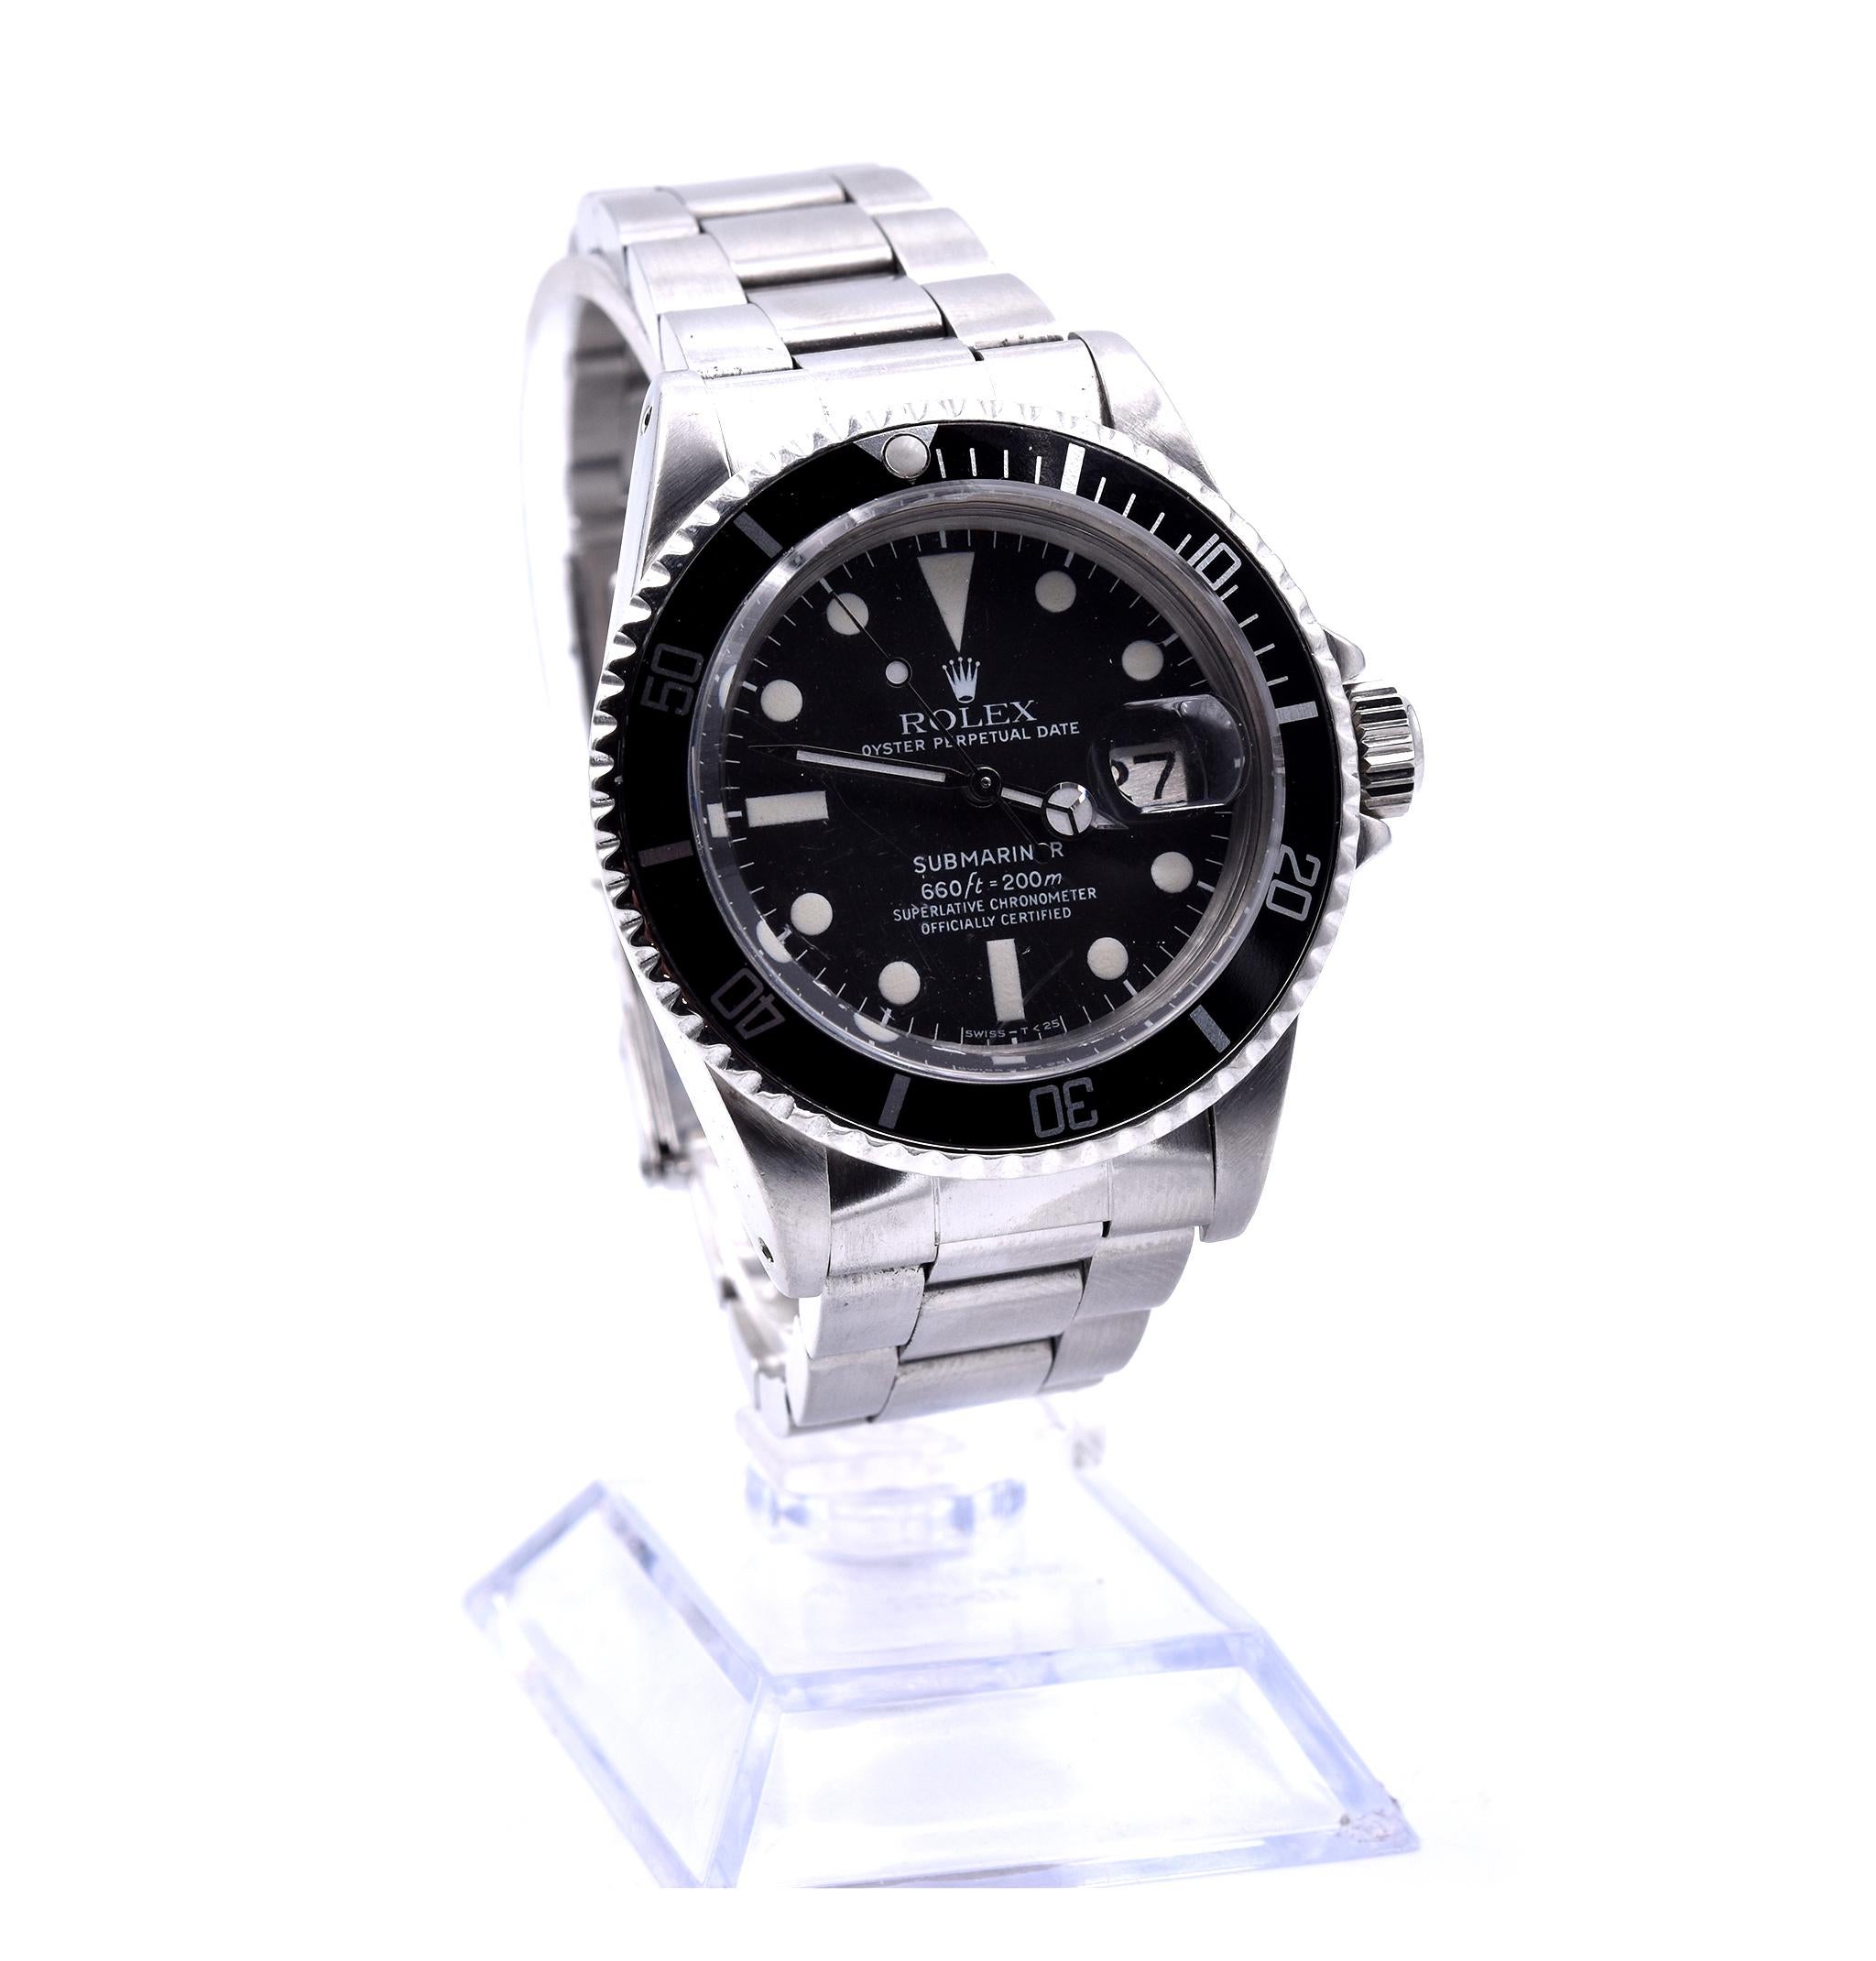 Movement: automatic 
Function: hours, minutes, seconds, date at 3 o’clock
Case: 40mm stainless steel case, rotatable time-lapse diver’s bezel, acrylic crystal
Dial: black dial with cream hour markers and hands
Band: Rolex stainless steel oyster lock